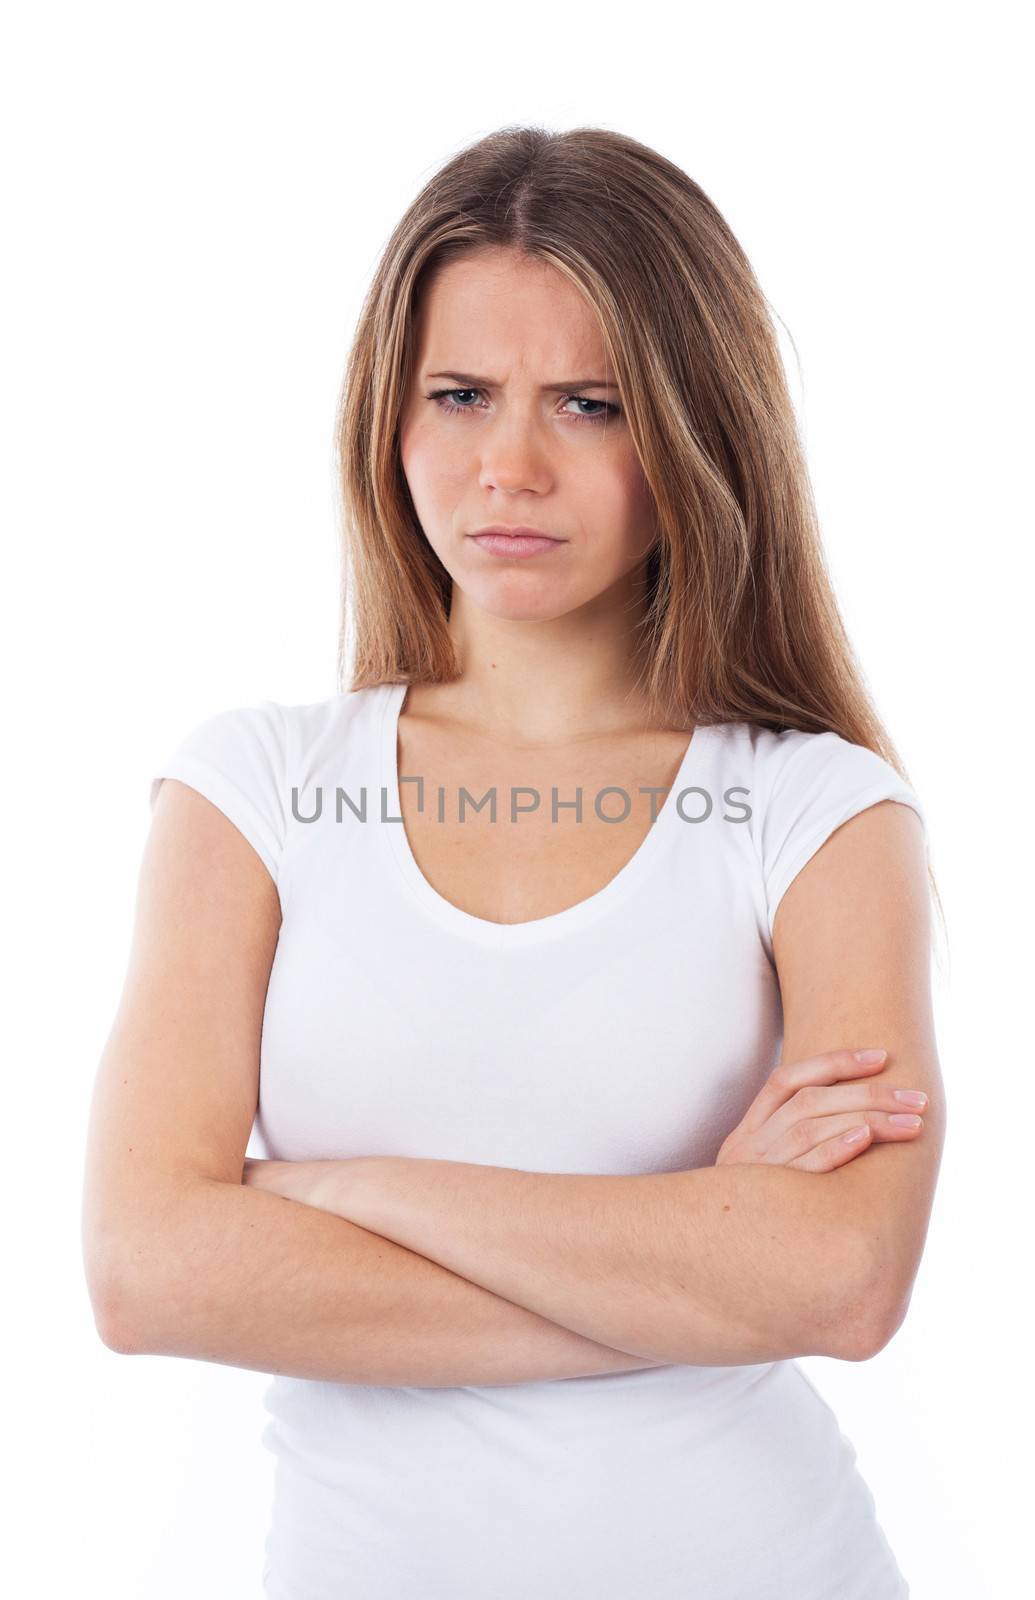 Portrait of an unhappy woman with arms crossed, isolated on white